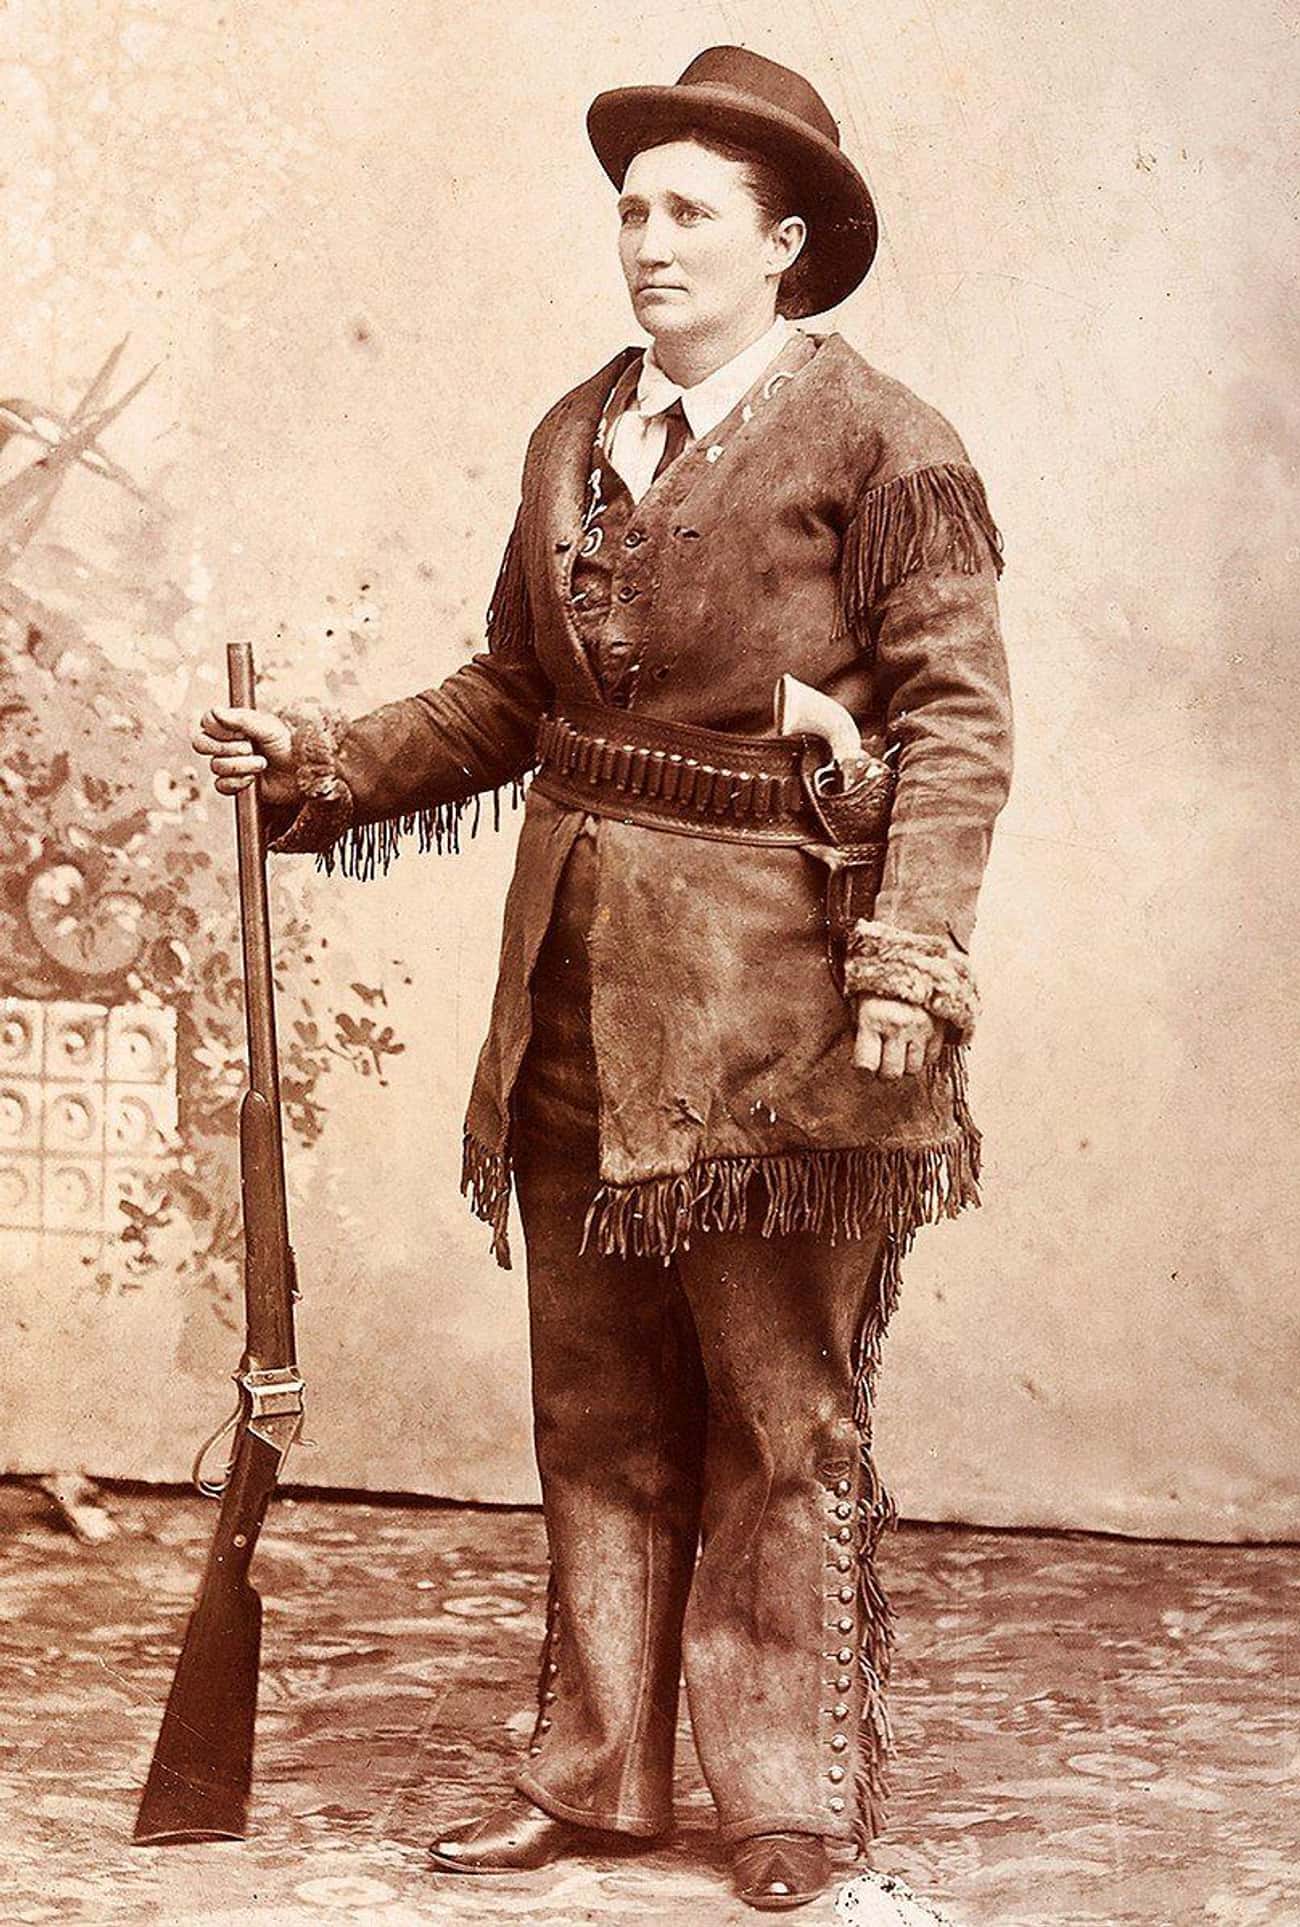 Calamity Jane Was Immune To Smallpox, Which Allowed Her To Care For Stricken Miners 